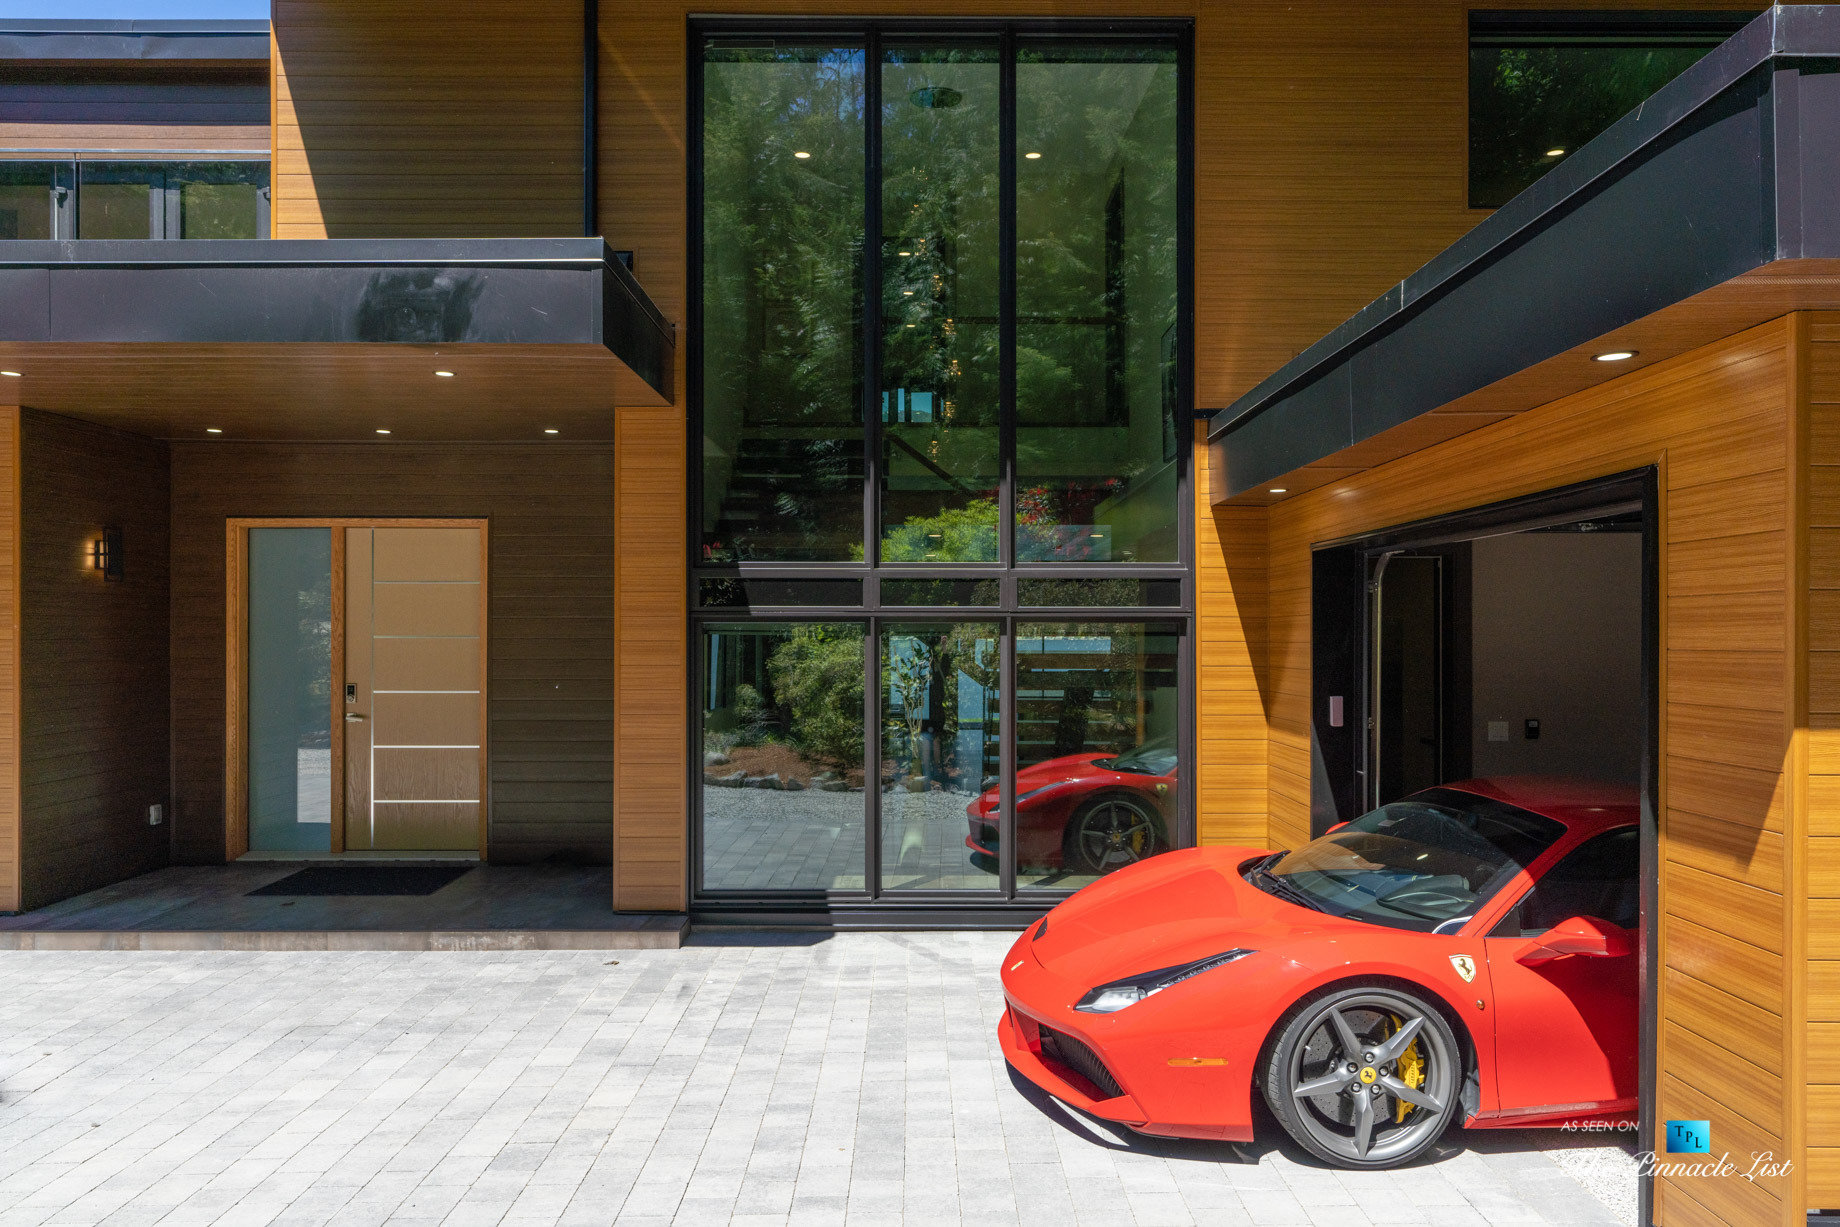 3350 Watson Rd, Belcarra, BC, Canada - Vancouver Luxury Real Estate - Modern Architectural Home with Red Ferrari